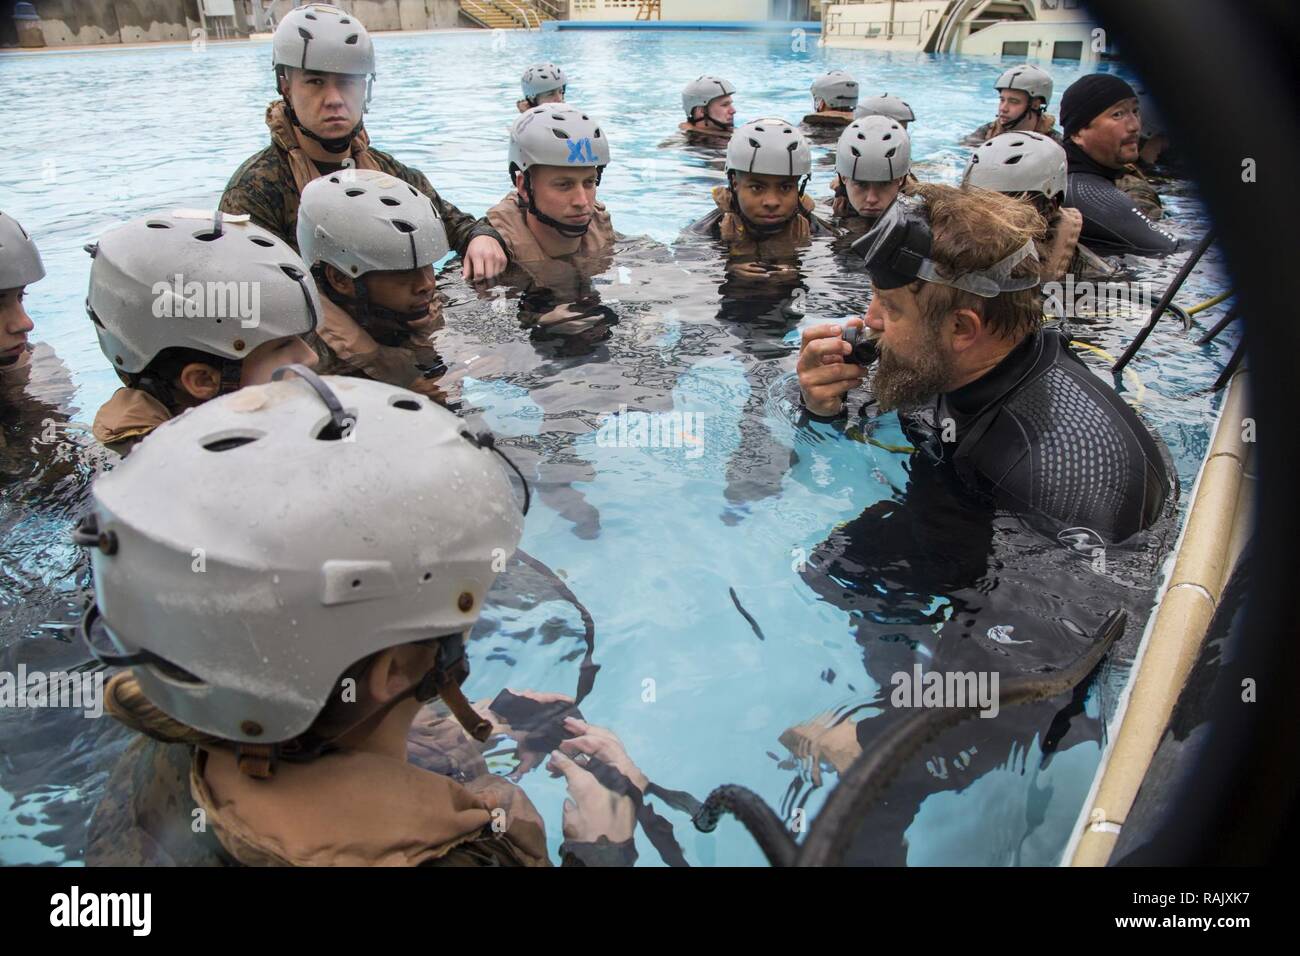 Jason Comeaux, Underwater Egress Training instructor, right, demonstrates how to breathe through an air regulator during UET on Camp Hansen, Okinawa, Japan, Feb. 9, 2017. U.S. Marines with Truck Company, Headquarters Battalion, 3rd Marine Division, III Marine Expeditionary Force, are required to complete UET as part of their pre-deployment training for Fuji Viper 17-3. Stock Photo